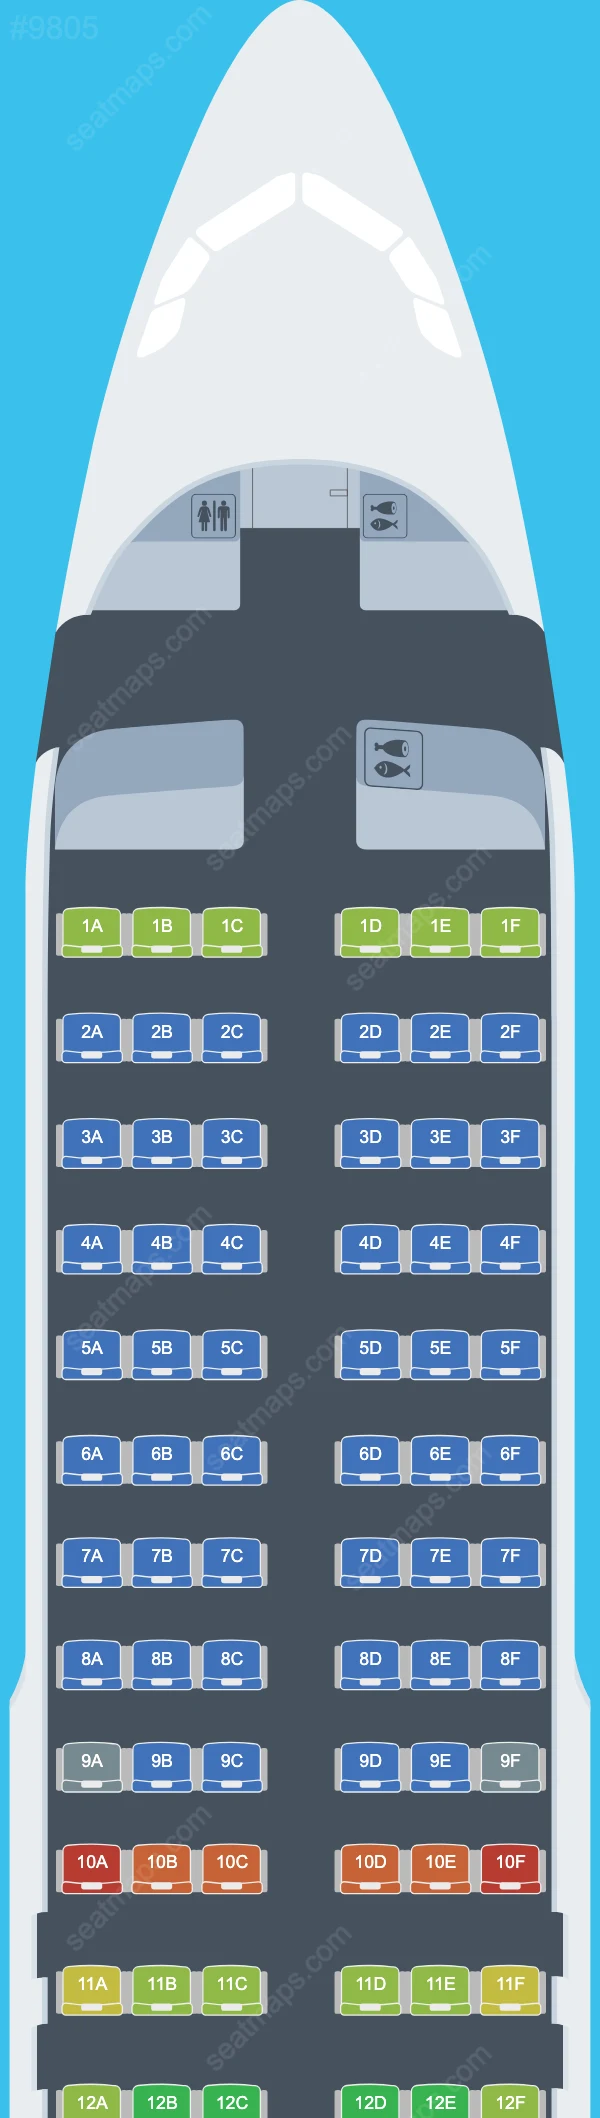 Olympic Air Airbus A320 Seat Maps A320-200 V.1